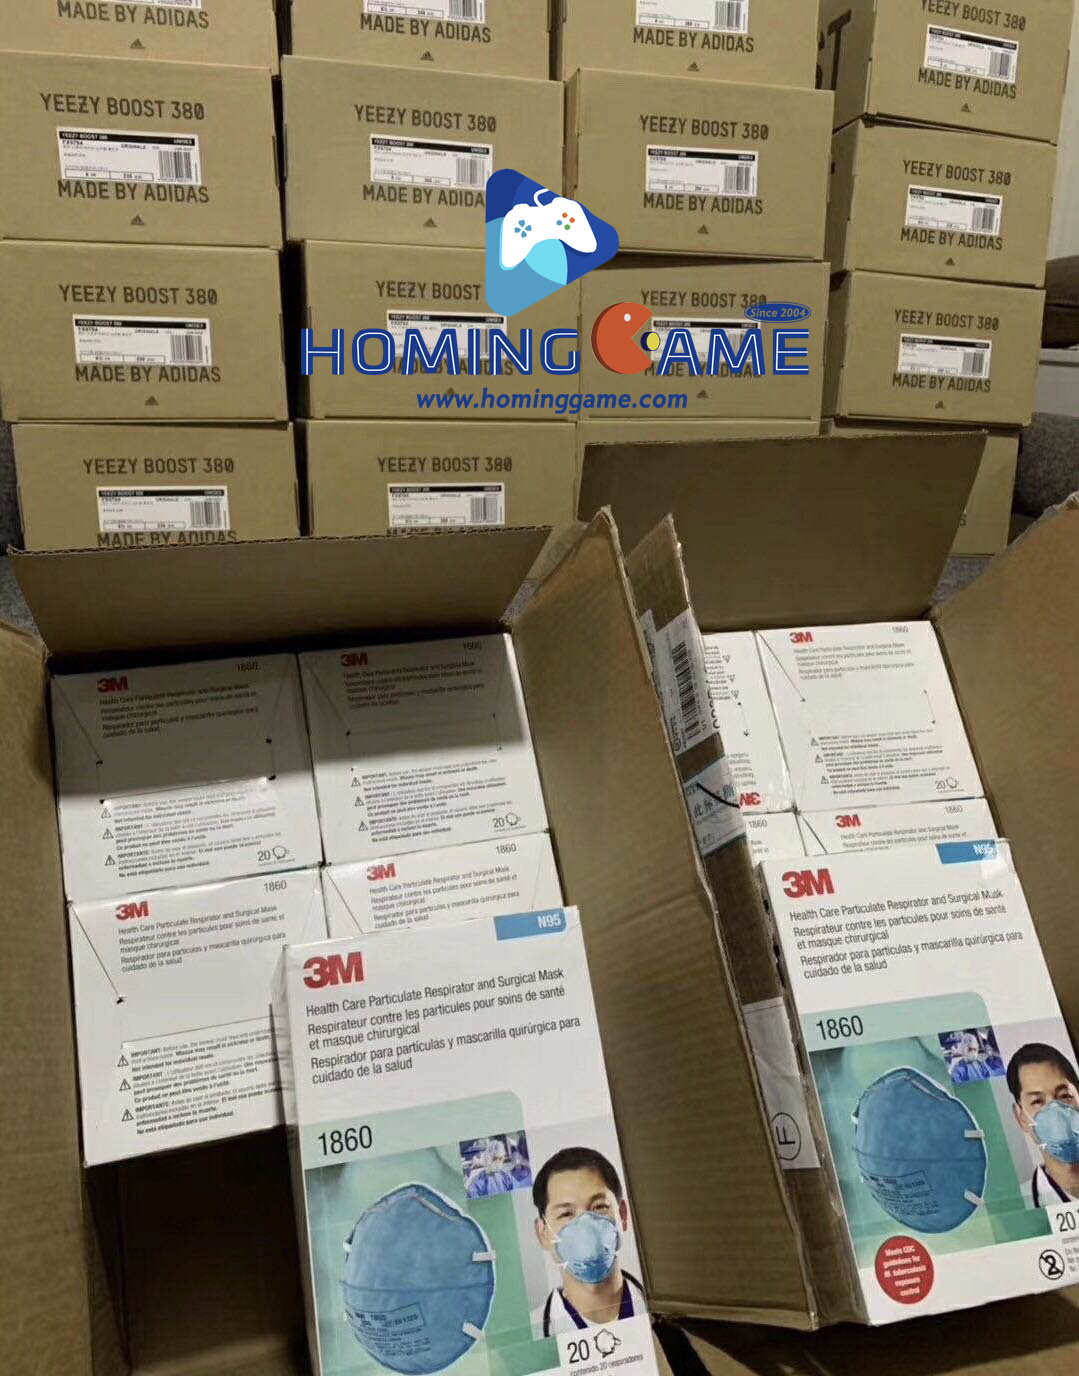 surgical mask,n95 mask,3m mask,3m medical 1860 N95 Mask,3m 1860 mecial mask,3m healthy care particulate respirator and surgical masks 1860,3m medical 1860 mask,3m disposable respirator 1860 mask,3m factory,3m usa company,3m disposable respirator N95 mask,3m medical mask 1860,3m medical 1860 mask FDA certificate,3m health care mask,N95,N95 medical mask,N95 disposable respirator mask,KN95 disposable respirator mask,medical mask,3m surgical mask,3m N95,N95 mask,3m 1860 mask,3m medical 1860 N95 mask supplier,3m 1860 N95 surgical mask price,3m medical 1860 n95 mask price